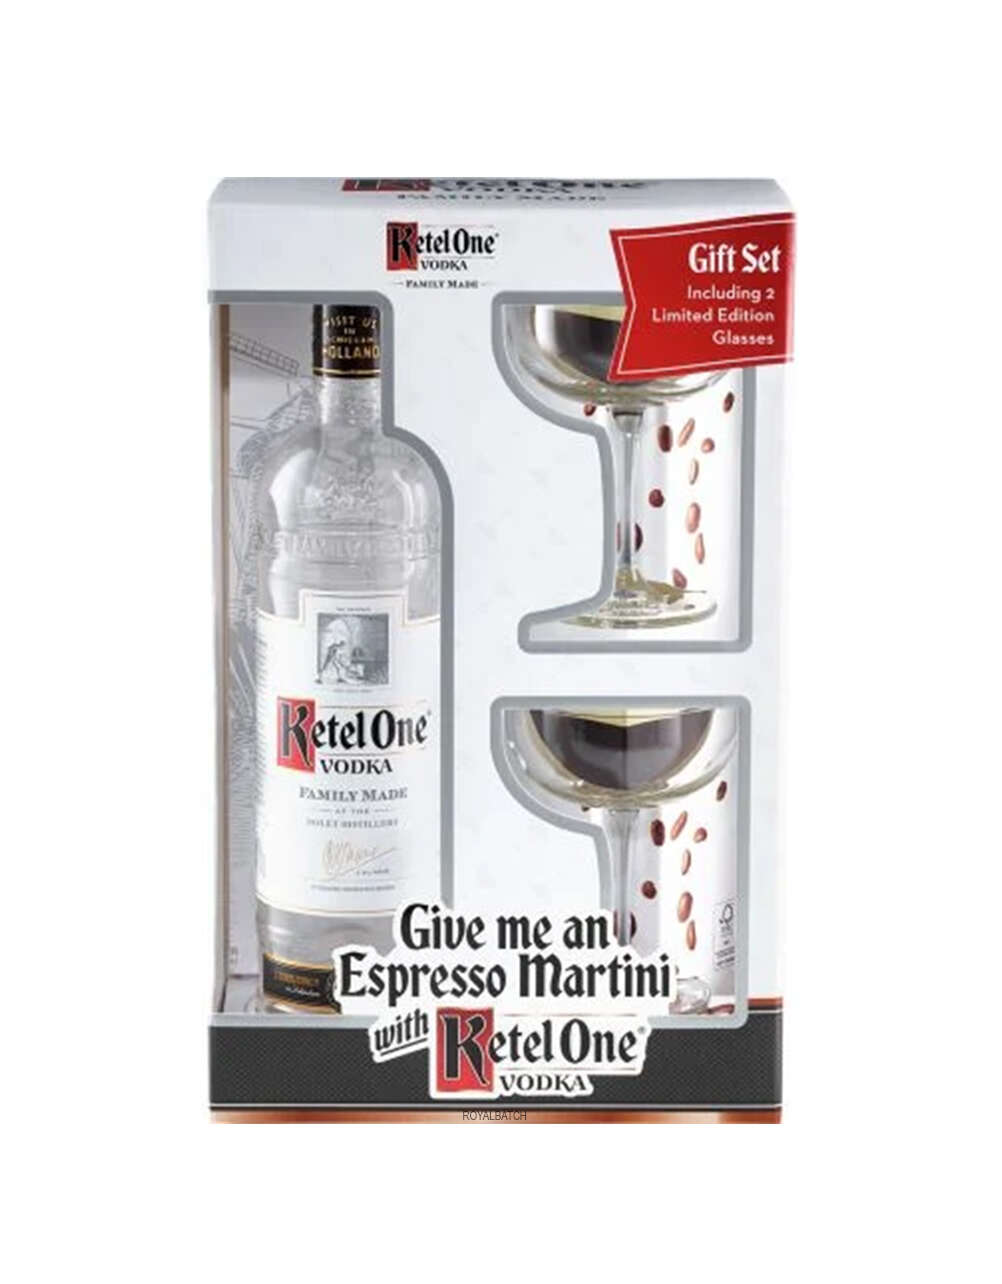 Ketel One Vodka with 2 Limited Edition Glasses Gift Set